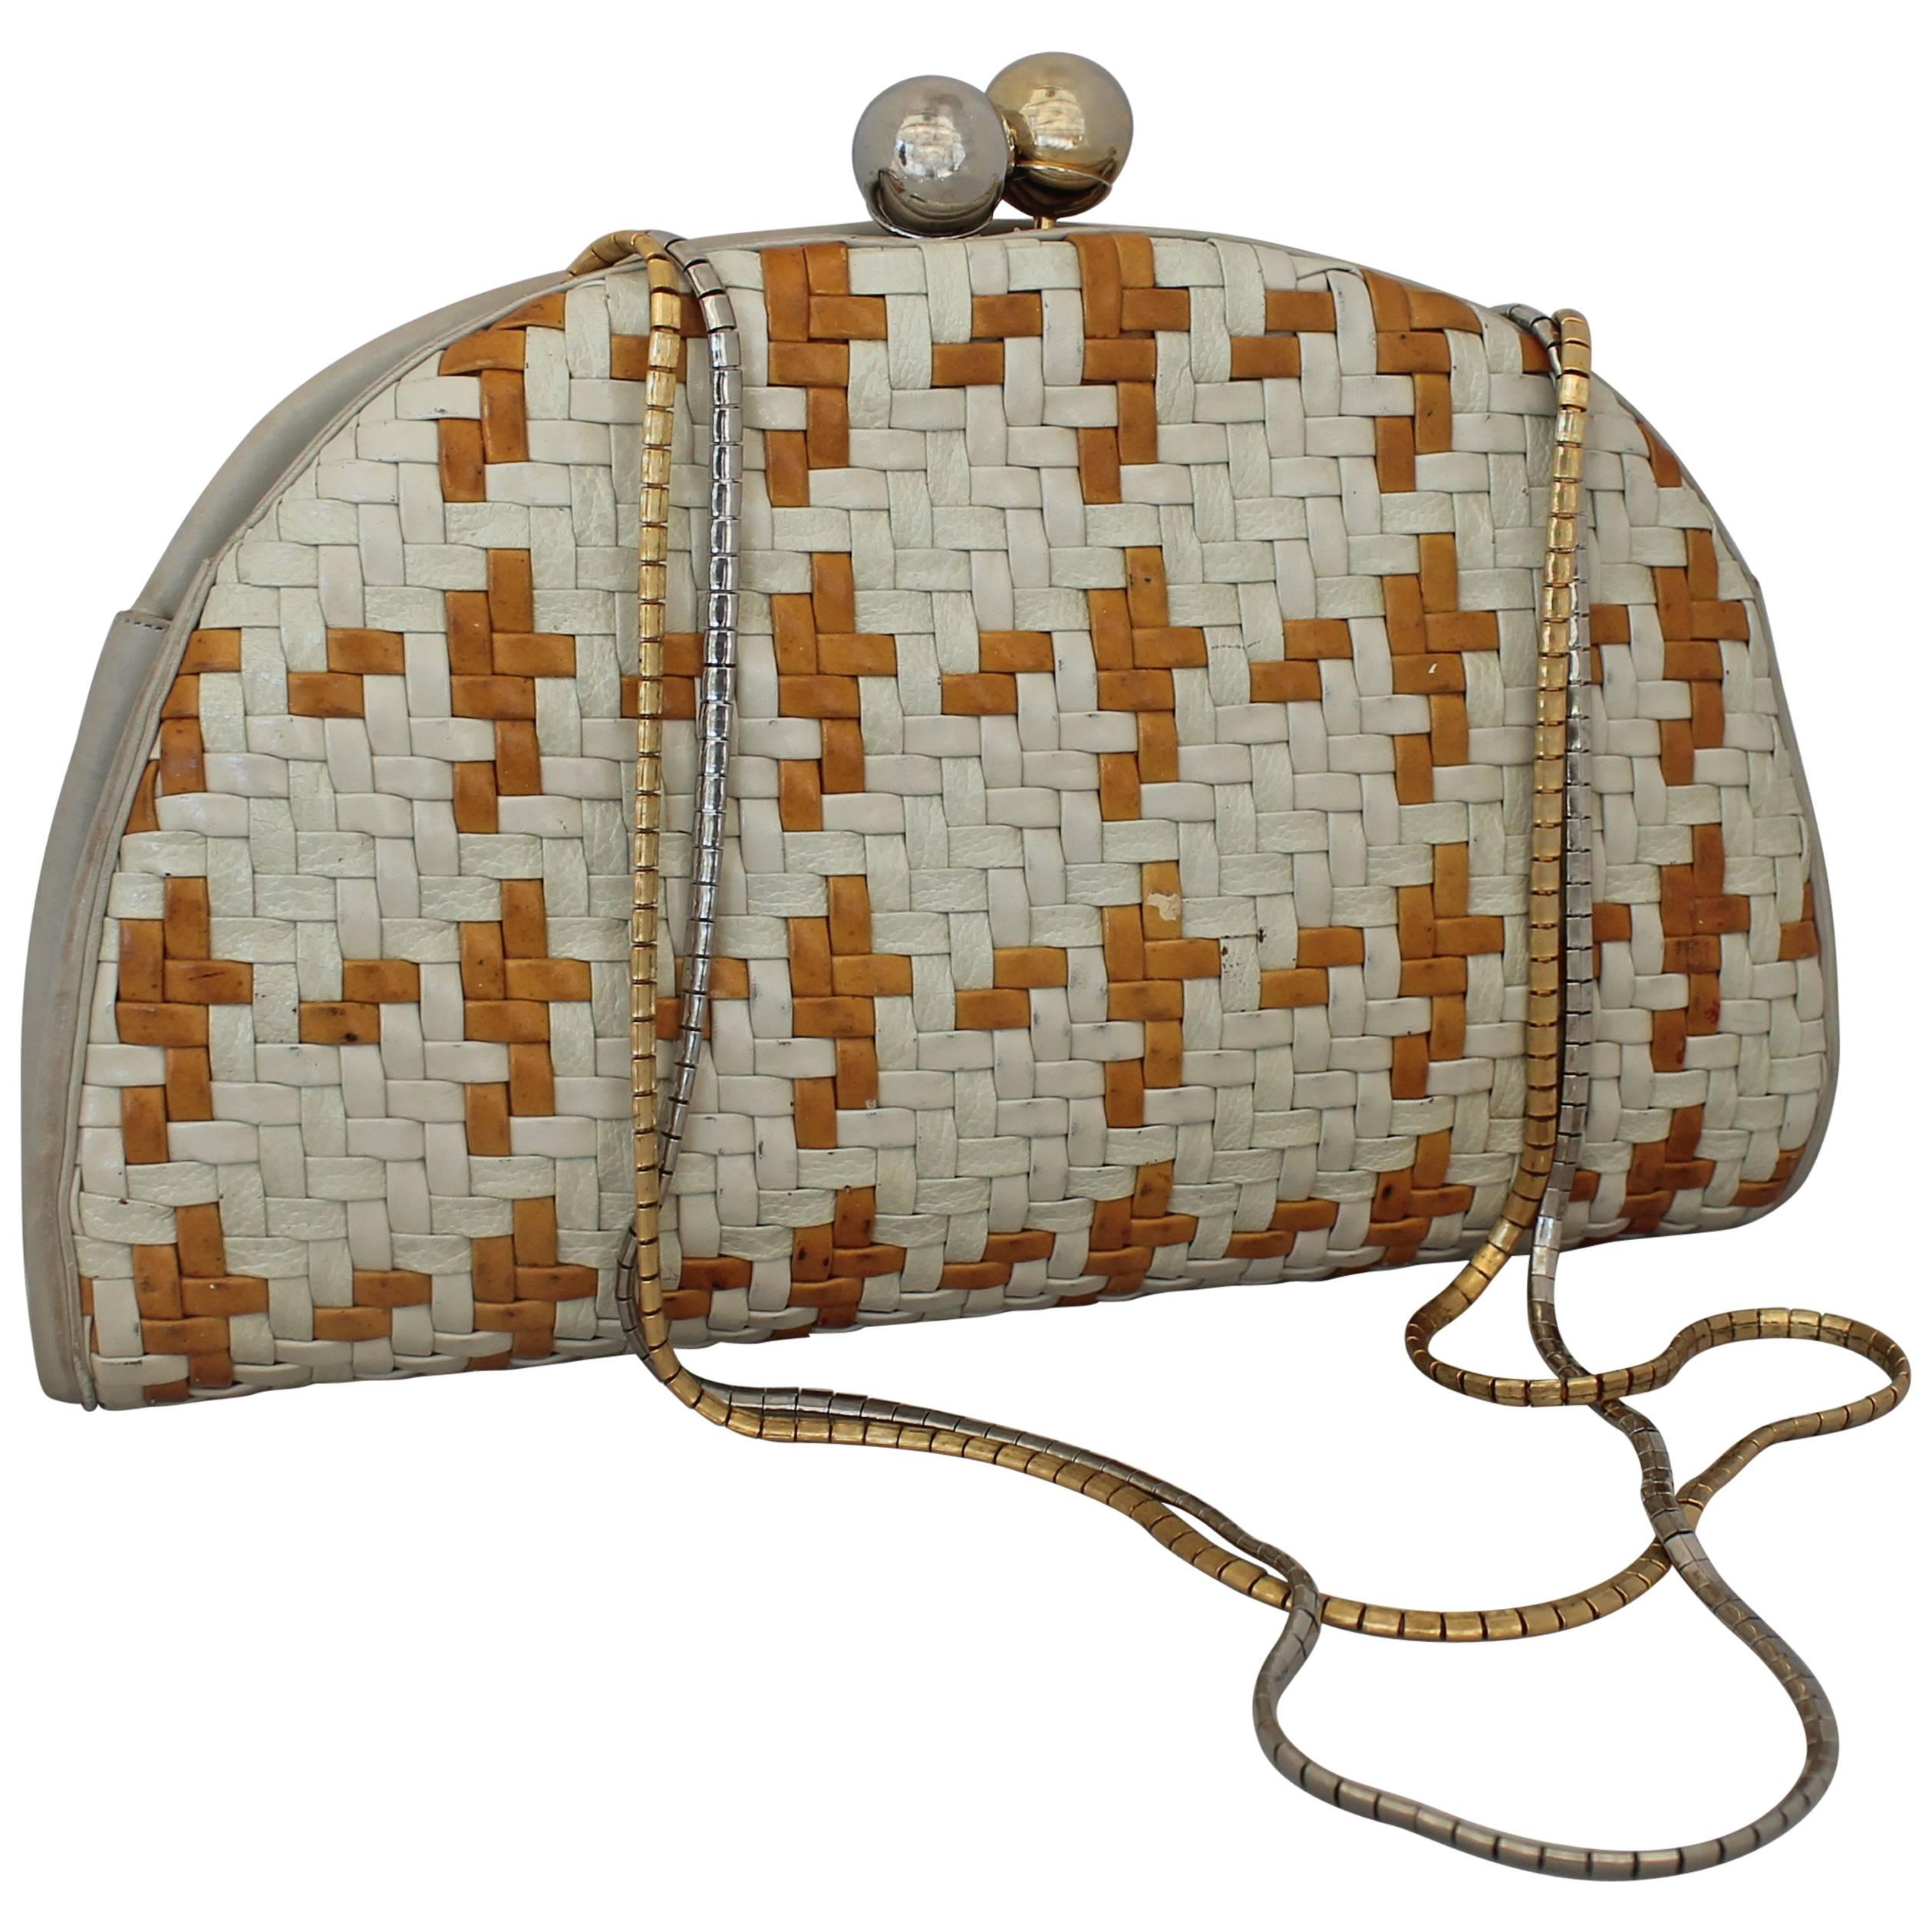 Judith Leiber Ivory & Mustard Woven Bag with Mixed Hardware - circa 1990's